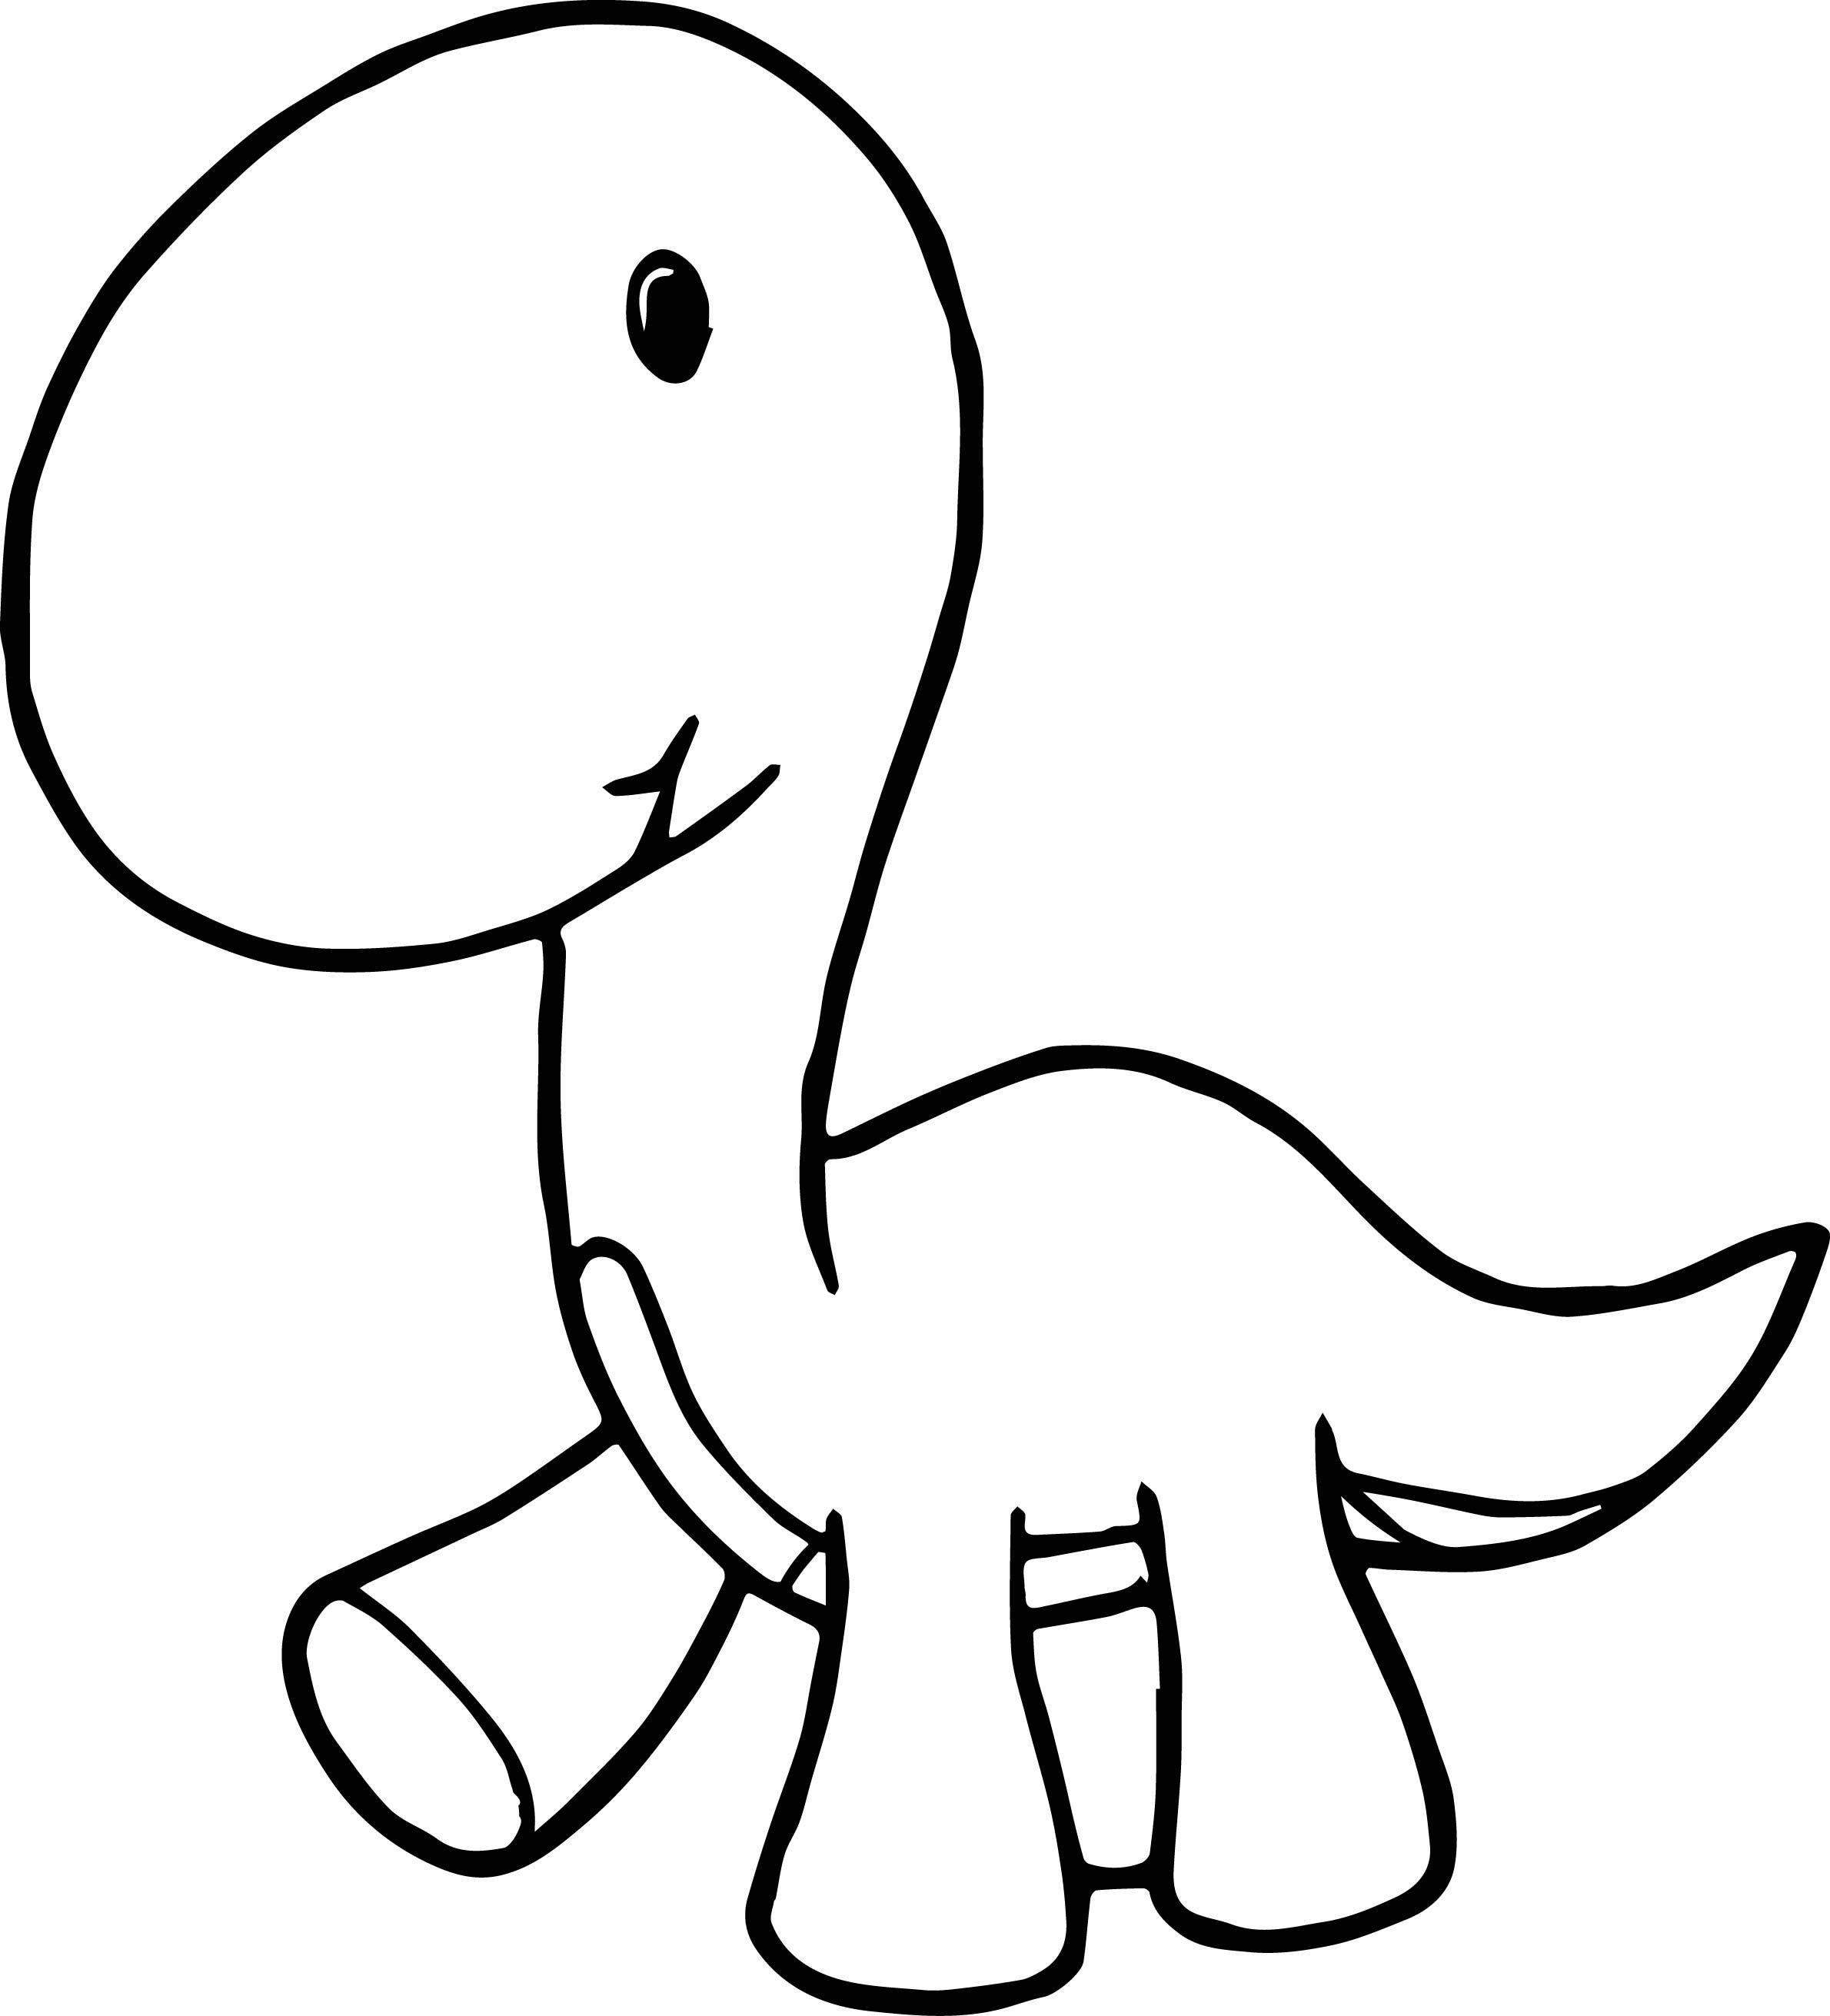 Cute Baby Dinosaur Coloring Pages at GetColorings.com | Free printable